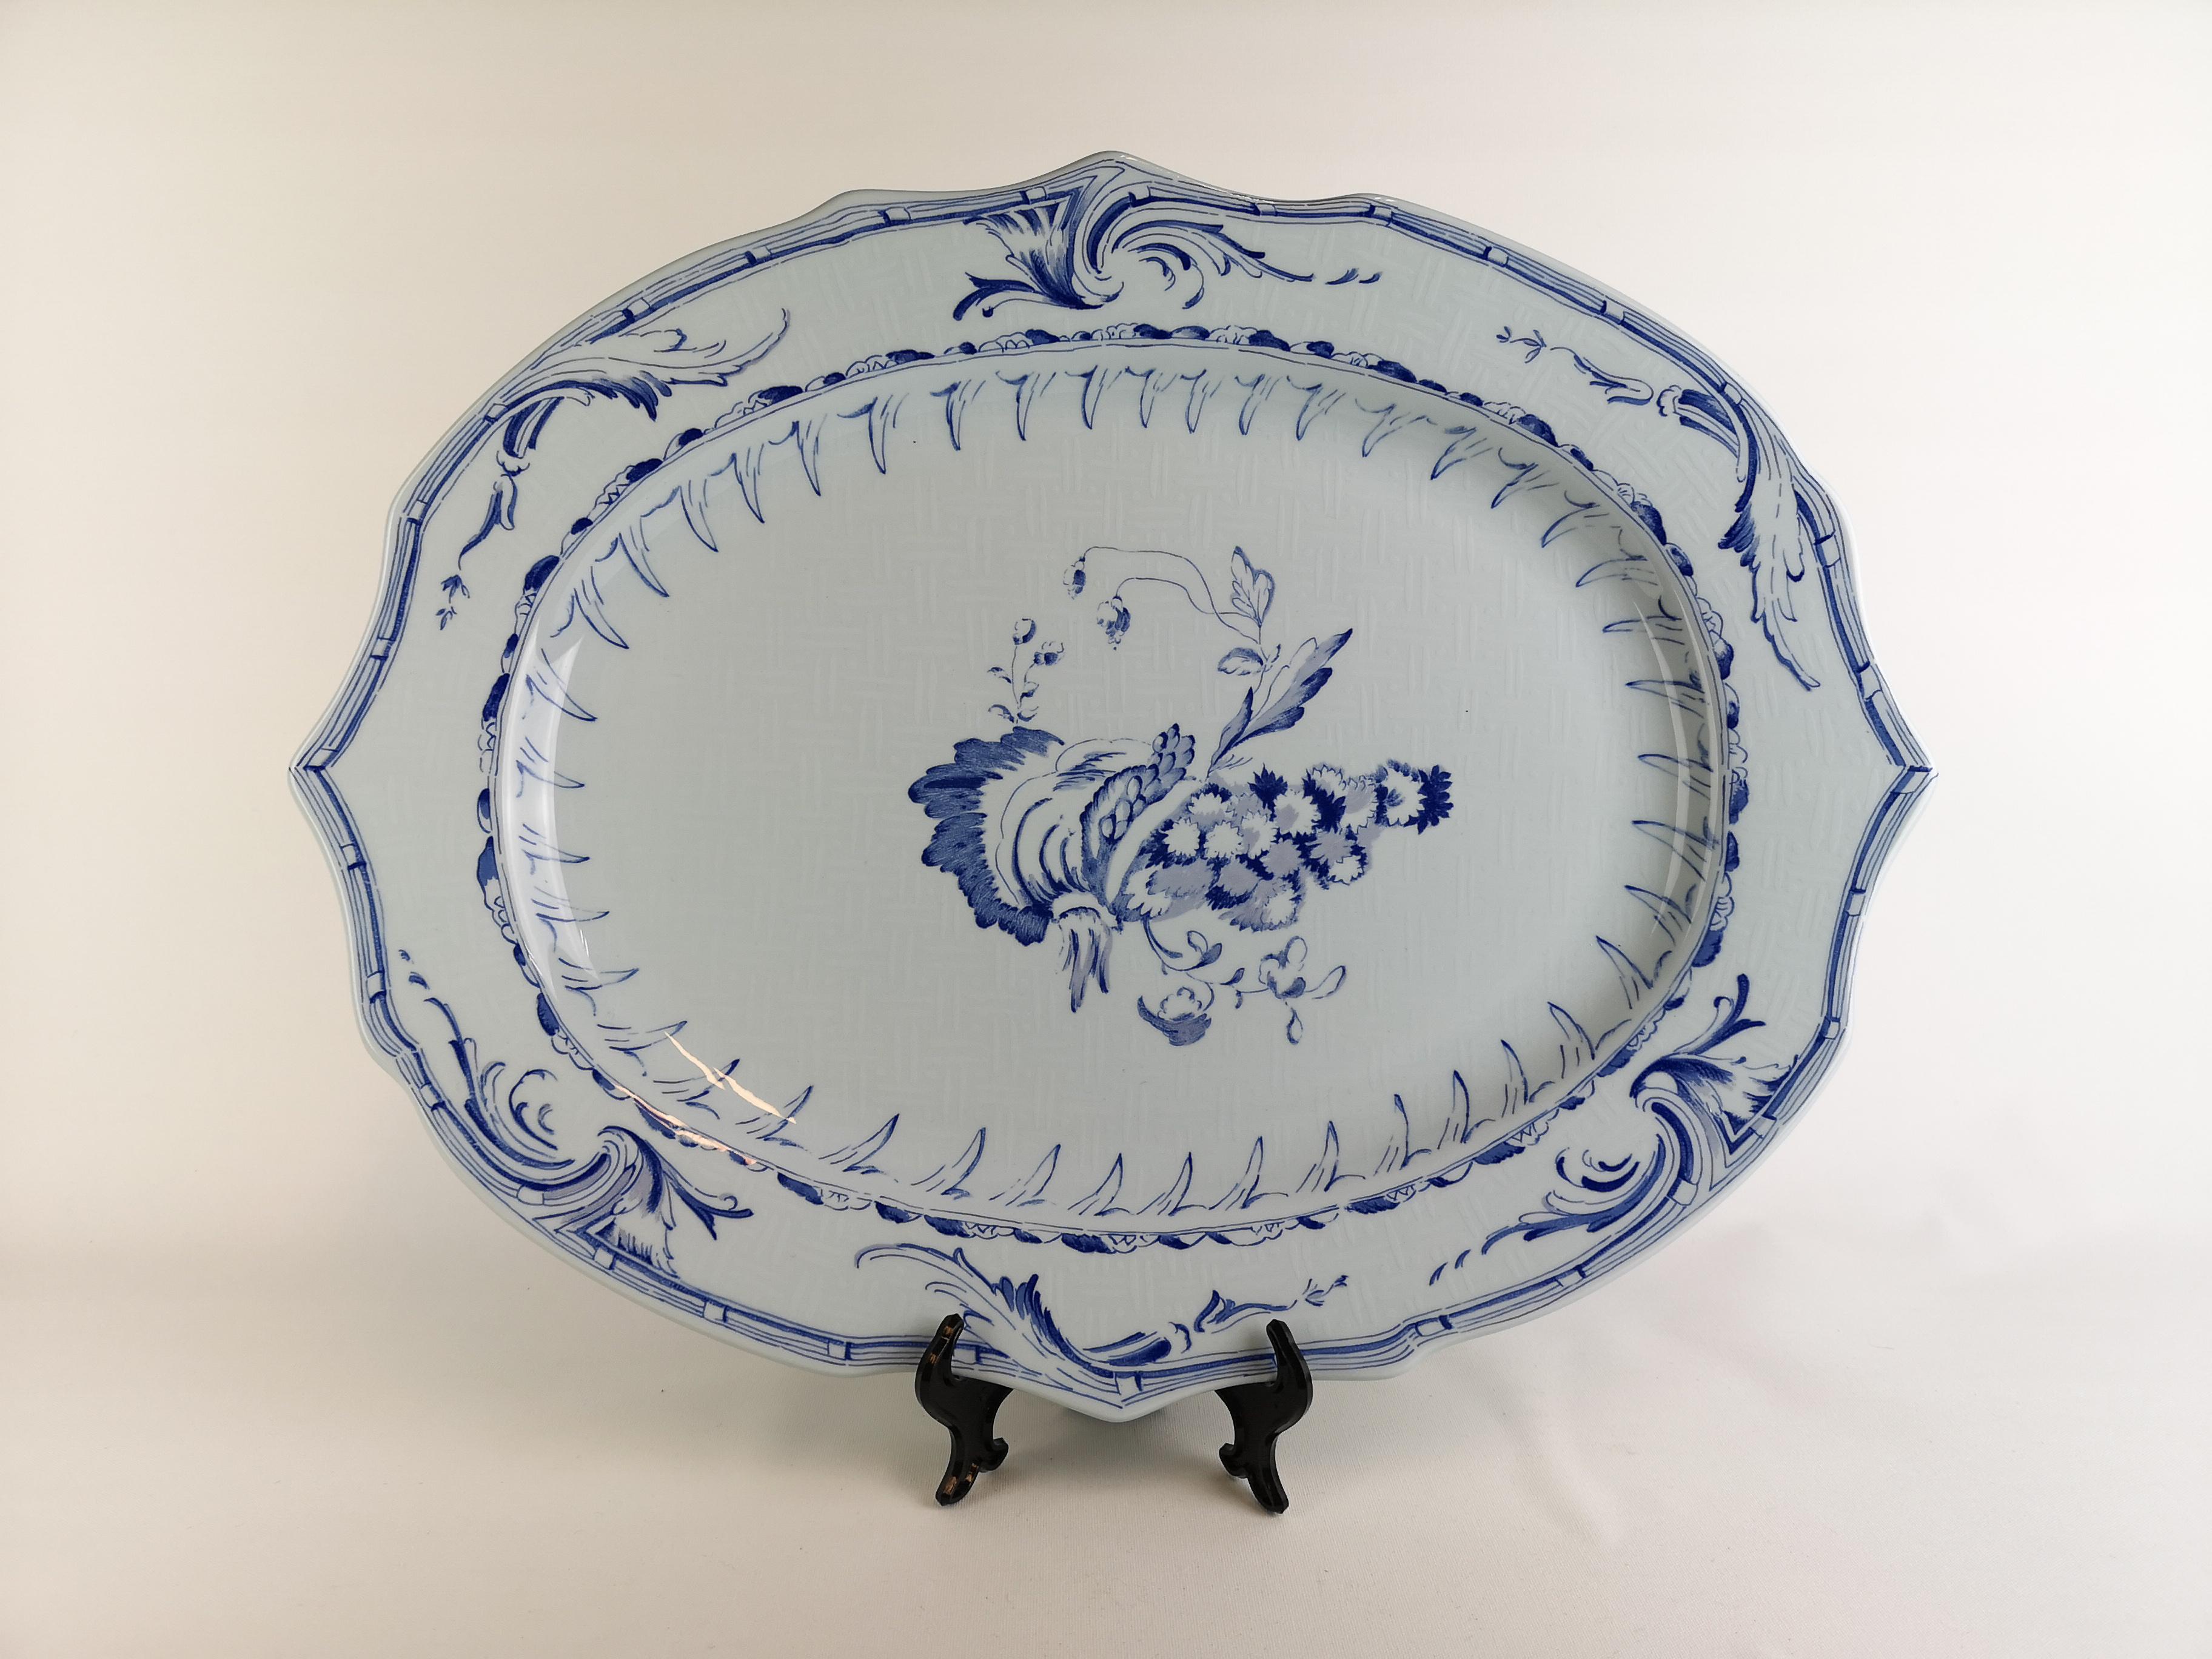 This large plate was made by Rörstrand in 1977 to honor there company being 250 years old. The plate was made in 1800 copies and this one is number 375 in that production. The pattern is a replica of the Rehnska pattern that was originally made in